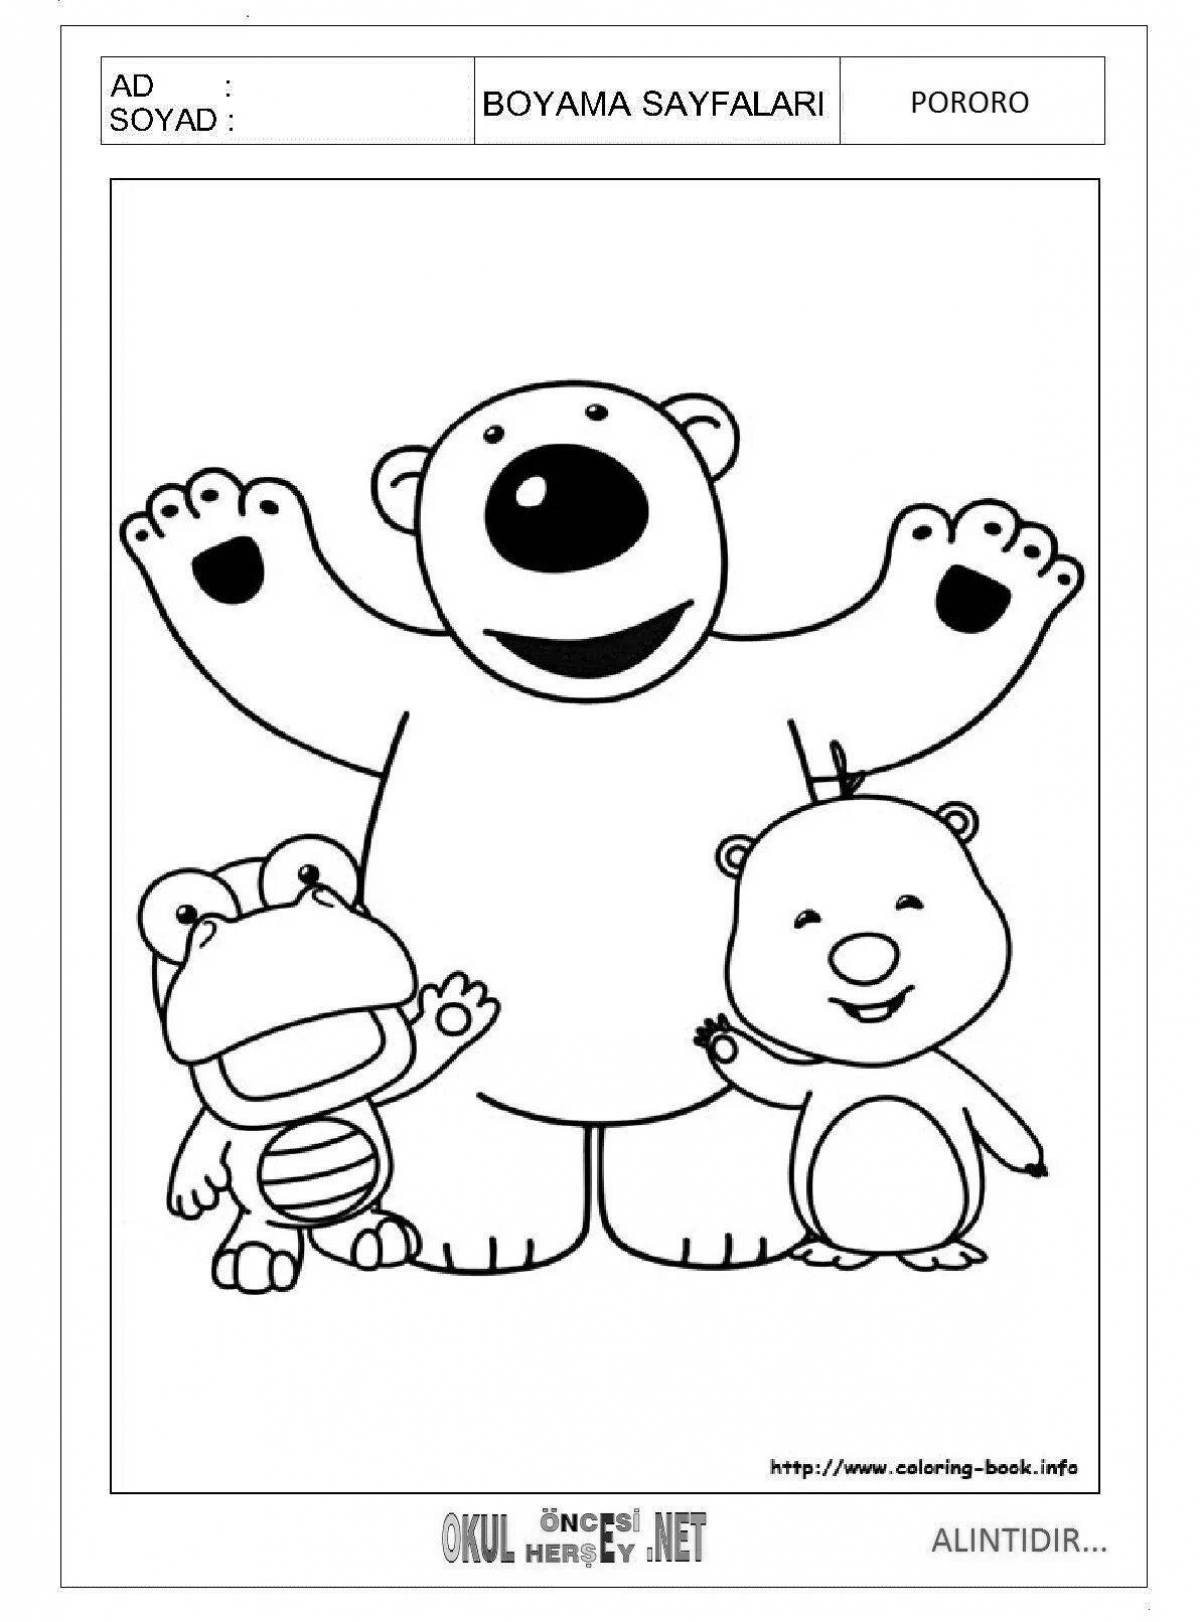 Duda and dada playful coloring page